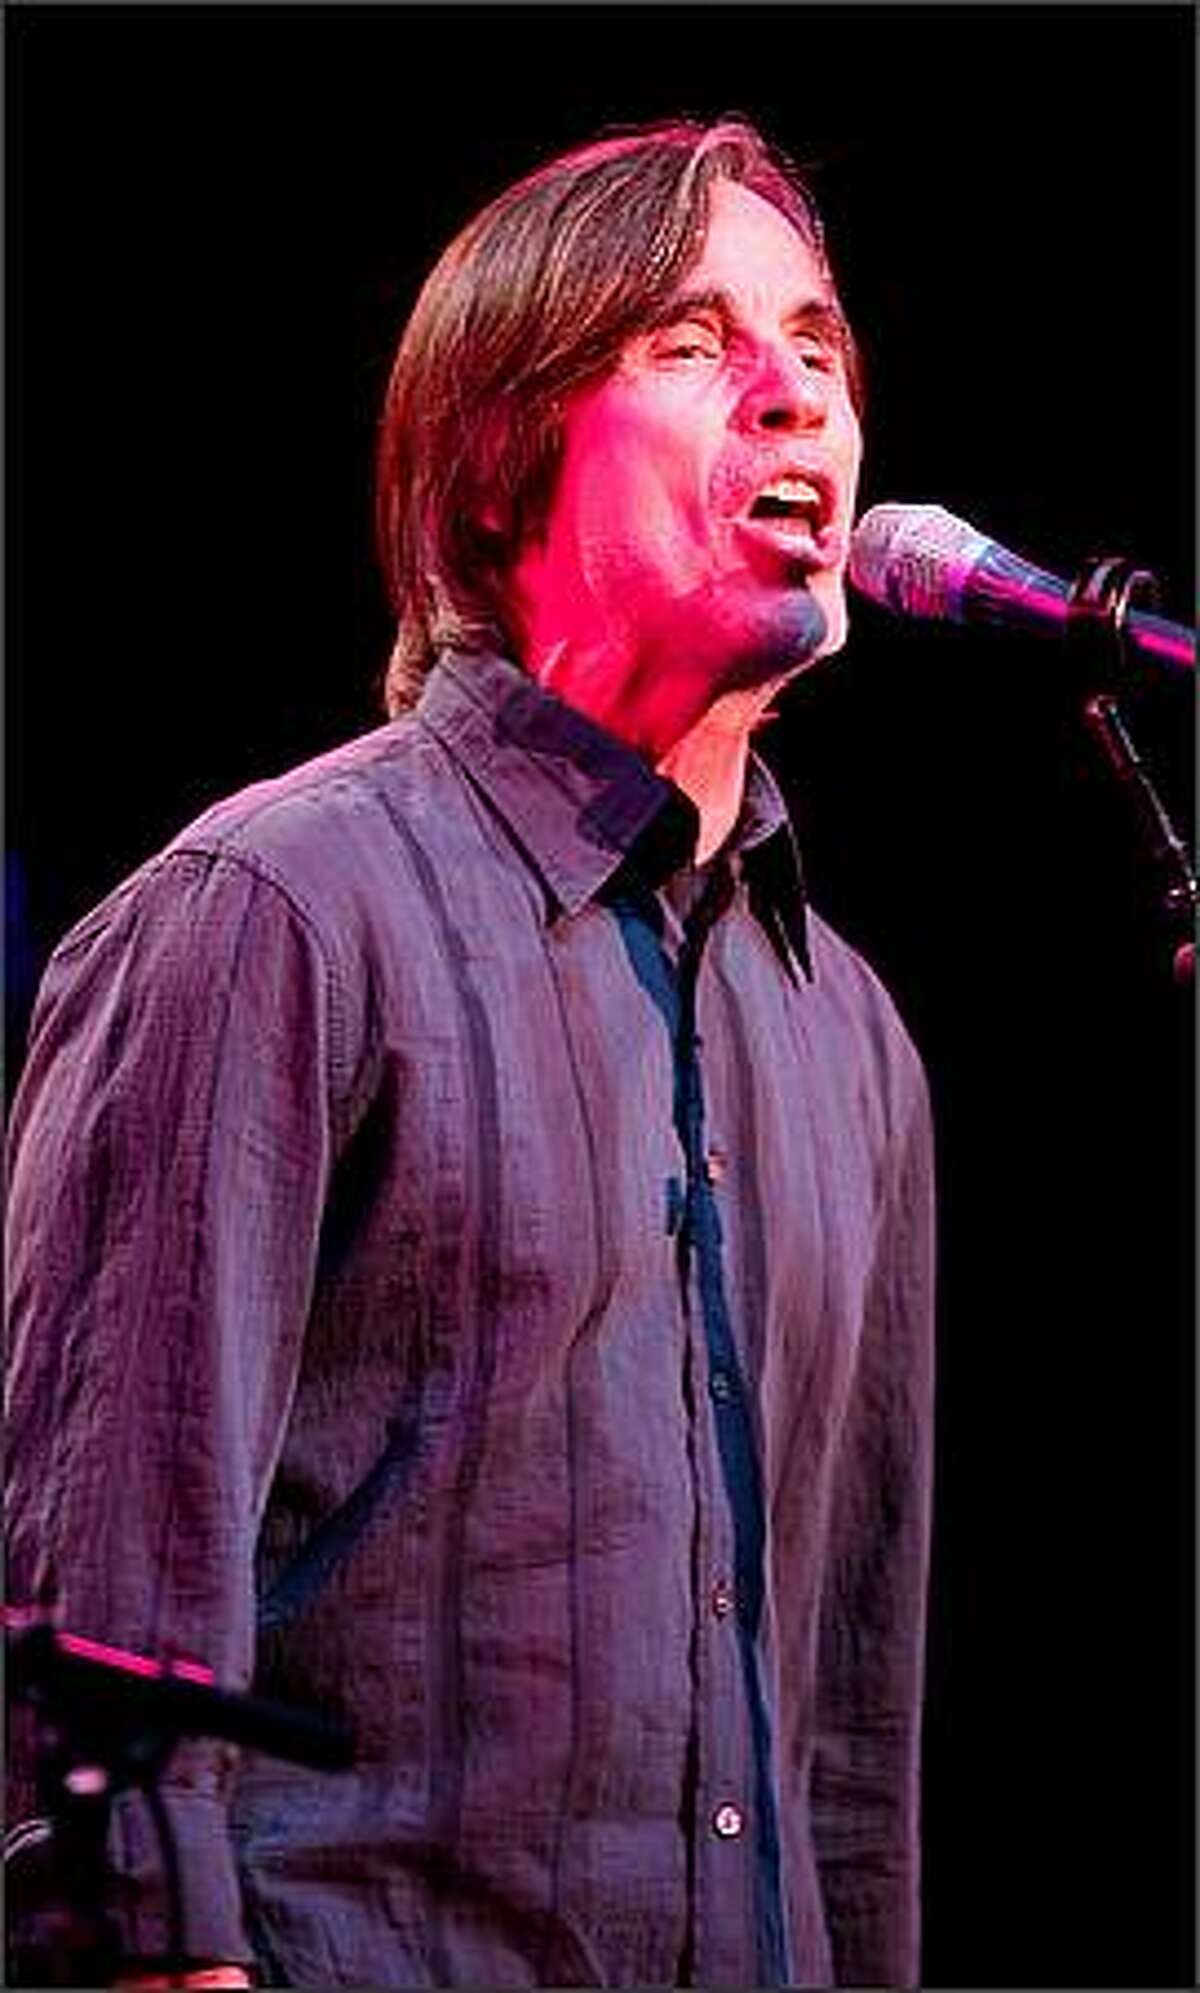 Jackson Browne performs at McCaw Hall in Seattle on Monday night.